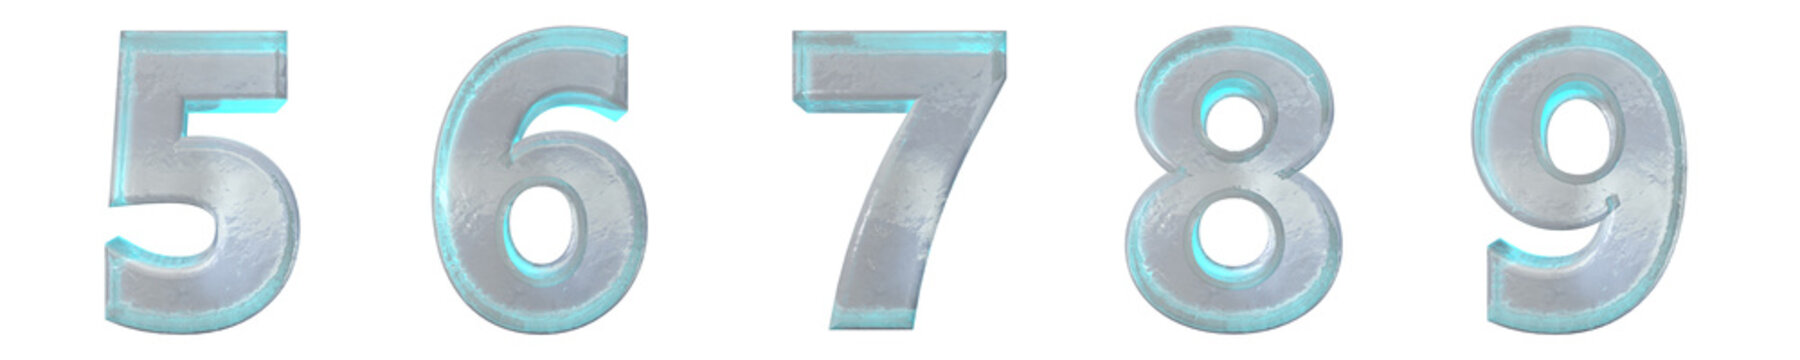 3D Numbers of ice or glass. Symbol set 5,6,7,8,9.